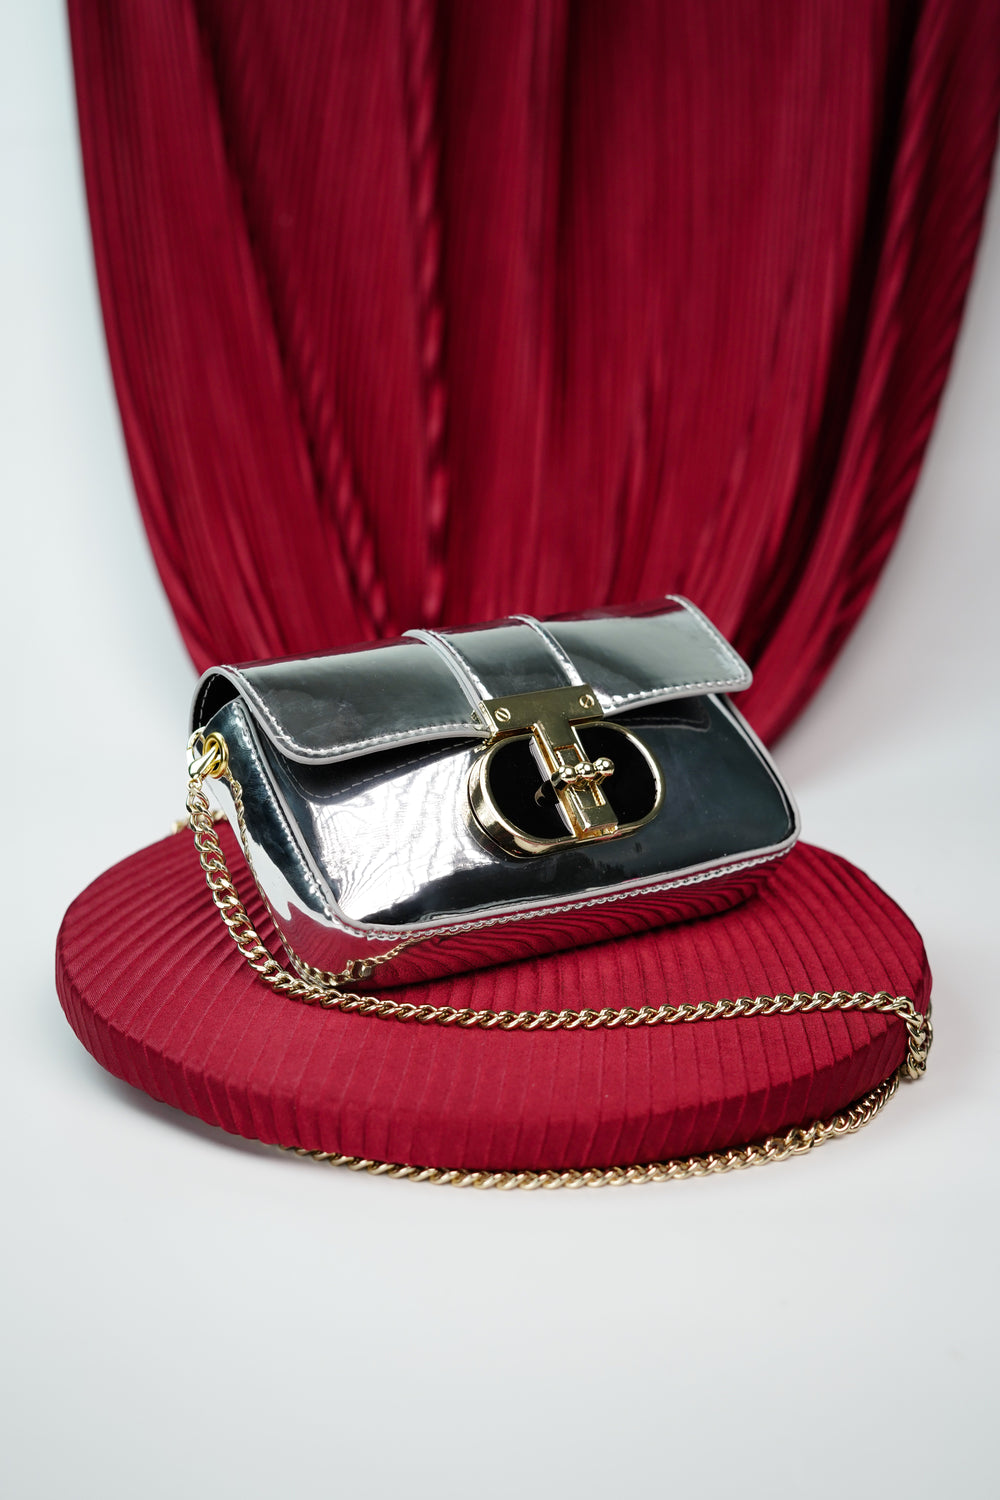 Fashionably Styled Belted Hip Bag Featuring a Mesmerizing Galaxy Gleam